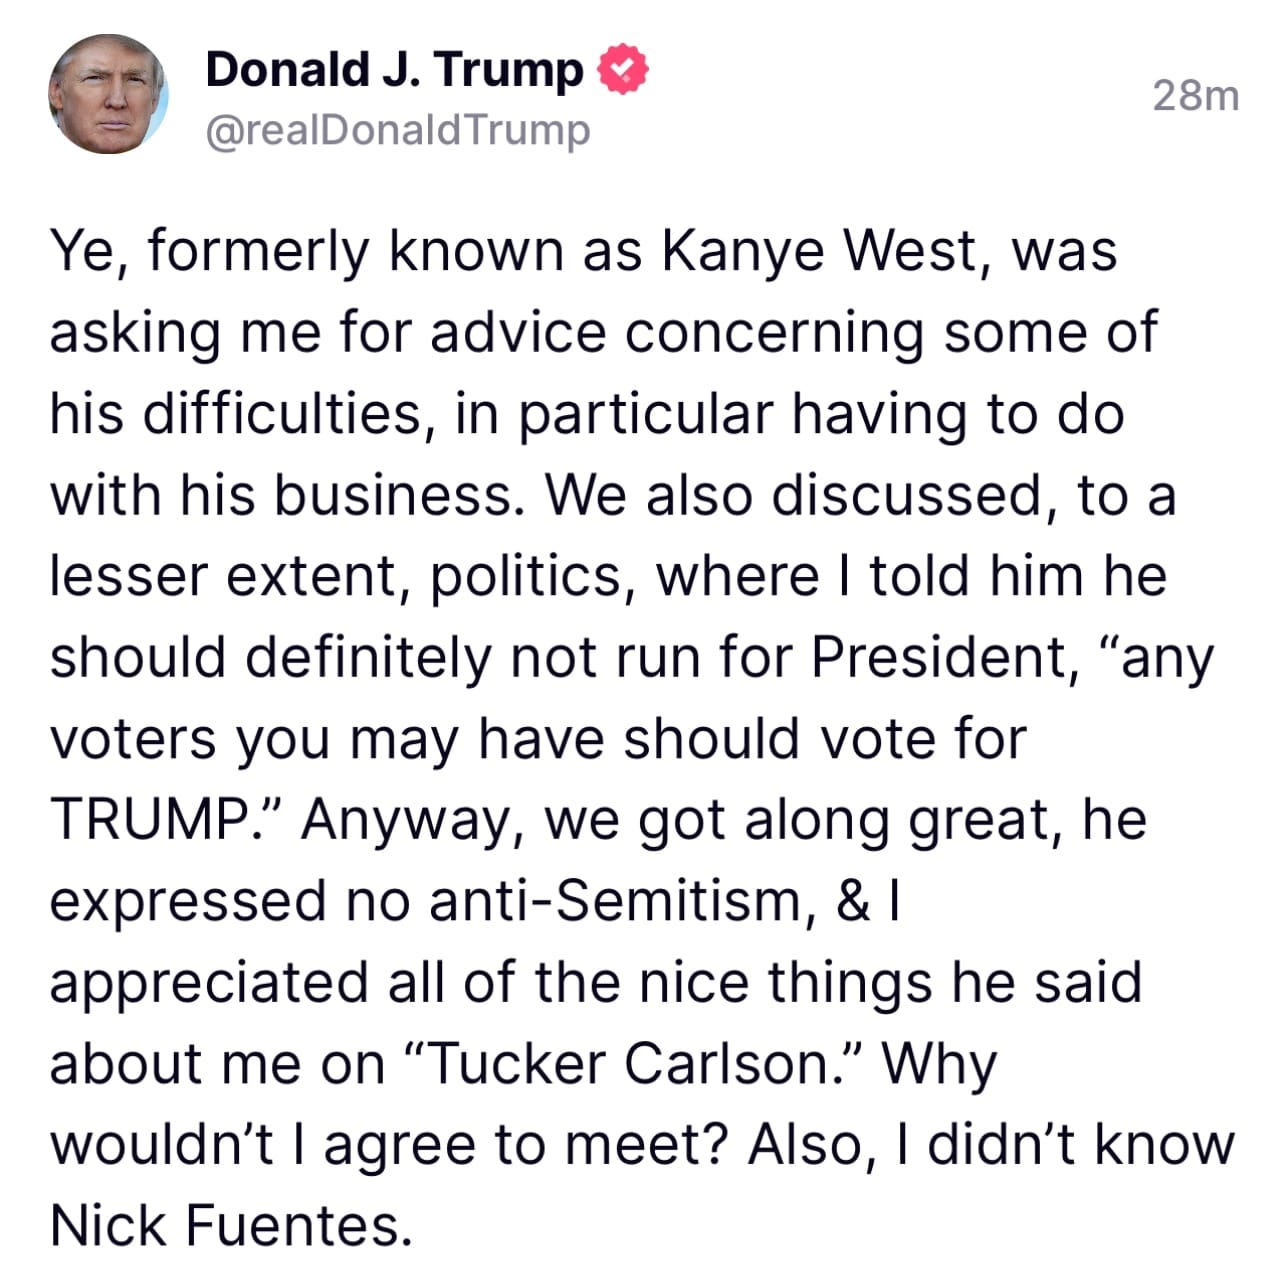 May be an image of 1 person and text that says 'Donald J. Trump @realDonaldTrump 28m Ye, formerly known as Kanye West, was asking me for advice concerning some of his difficulties, in particular having to do with his business. We also discussed, to a lesser extent, politics, where told him he should definitely not run for President, "any voters you may have should vote for TRUMP." Anyway, we got along great, he expressed no anti-Semitism, appreciated all of the nice things he said about me on "Tucker Carlson." Why wouldn't agree to meet? Also, didn't know Nick Fuentes.'